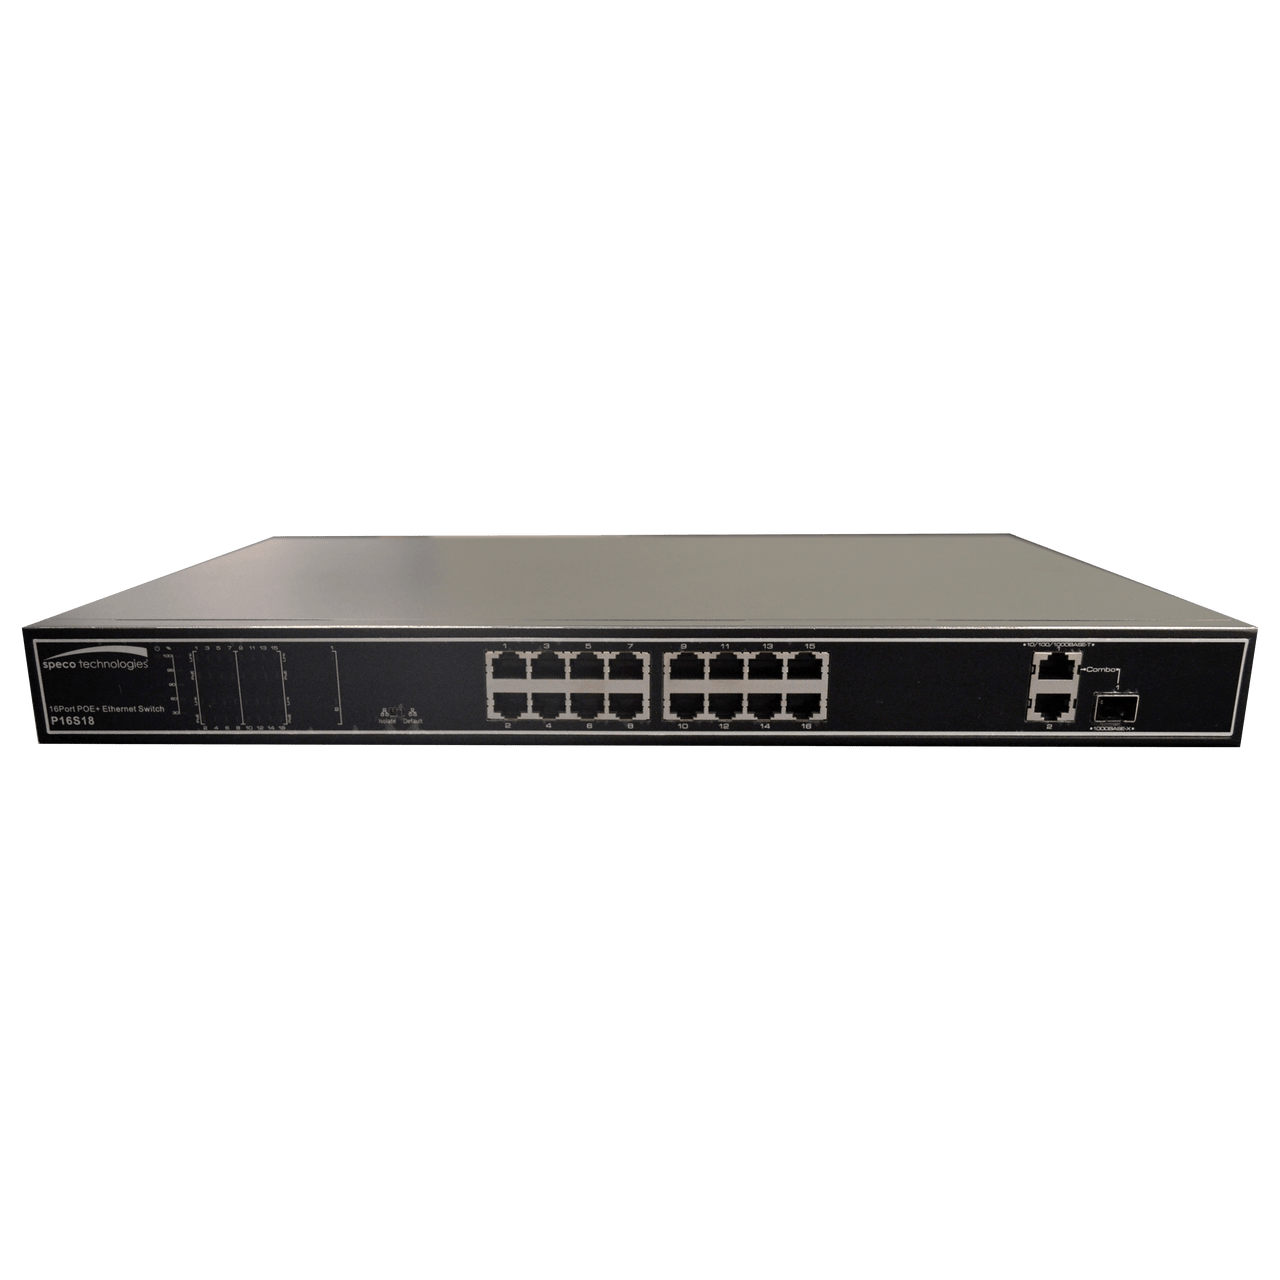 Speco Technologies P16S18 18 Port Switch with 16 port PoE 802.3at, 180W total power budget (P16S18)